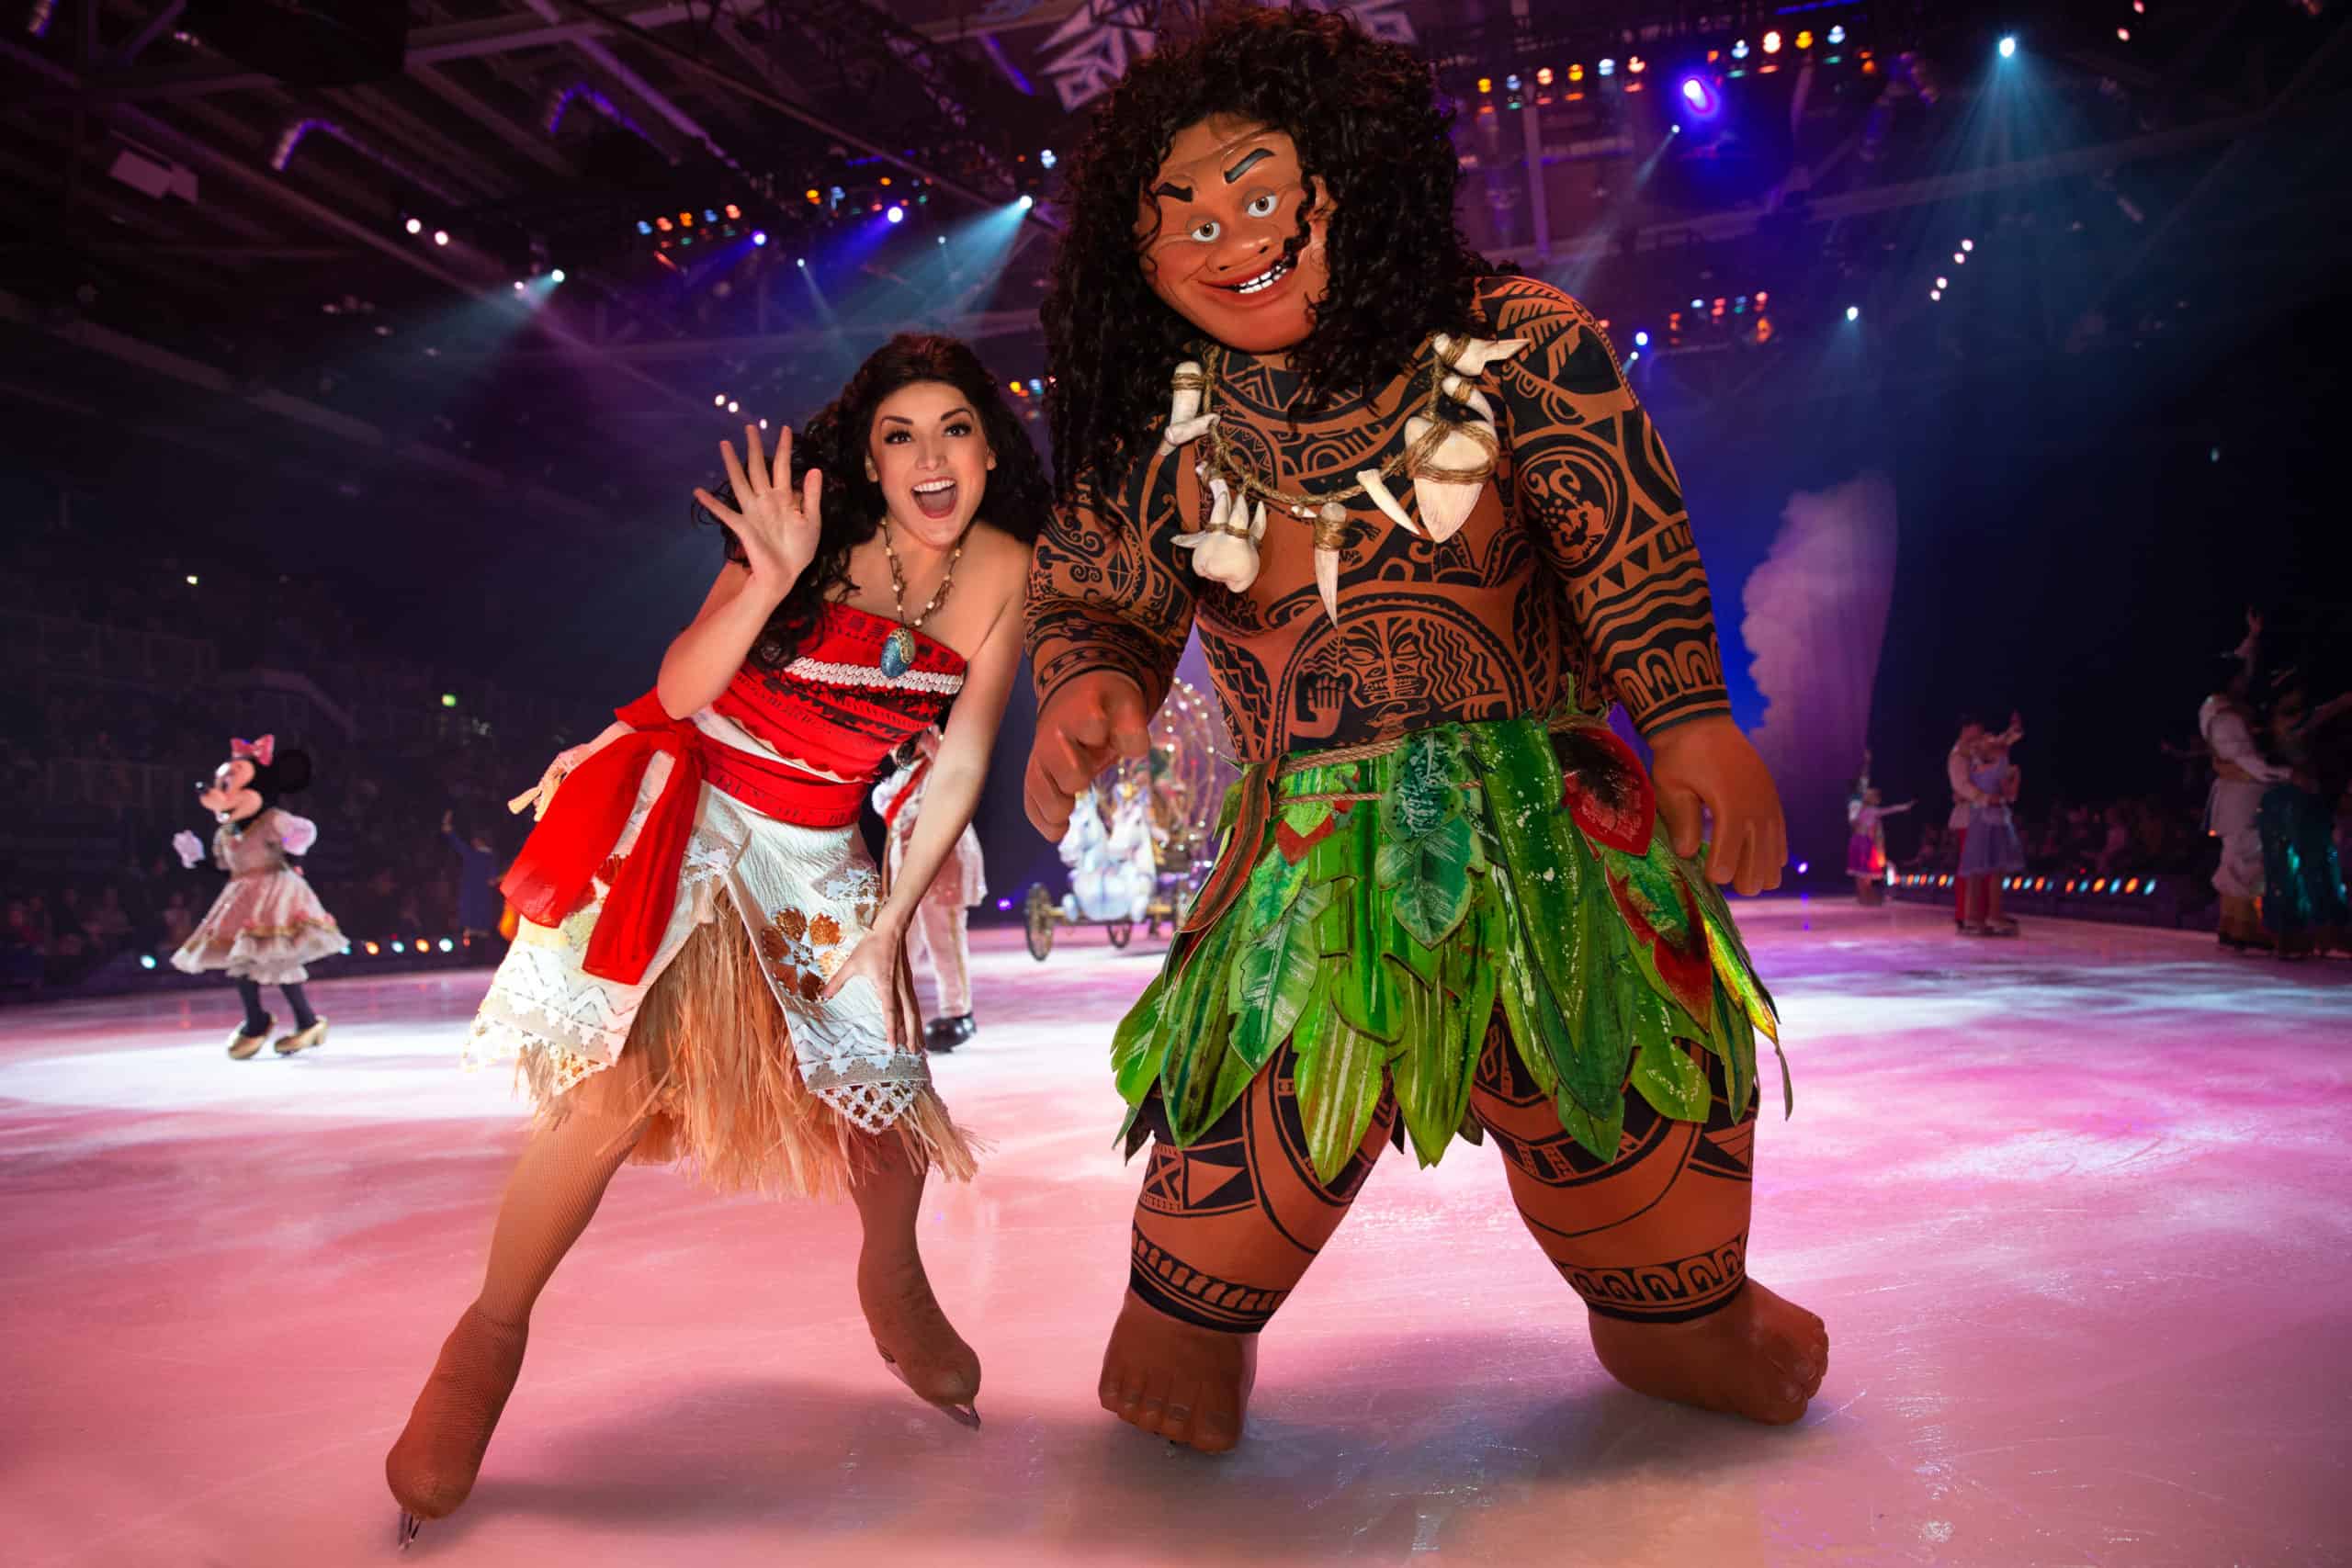 DISNEY ON ICE SHOWS A Mother's Random Thoughts